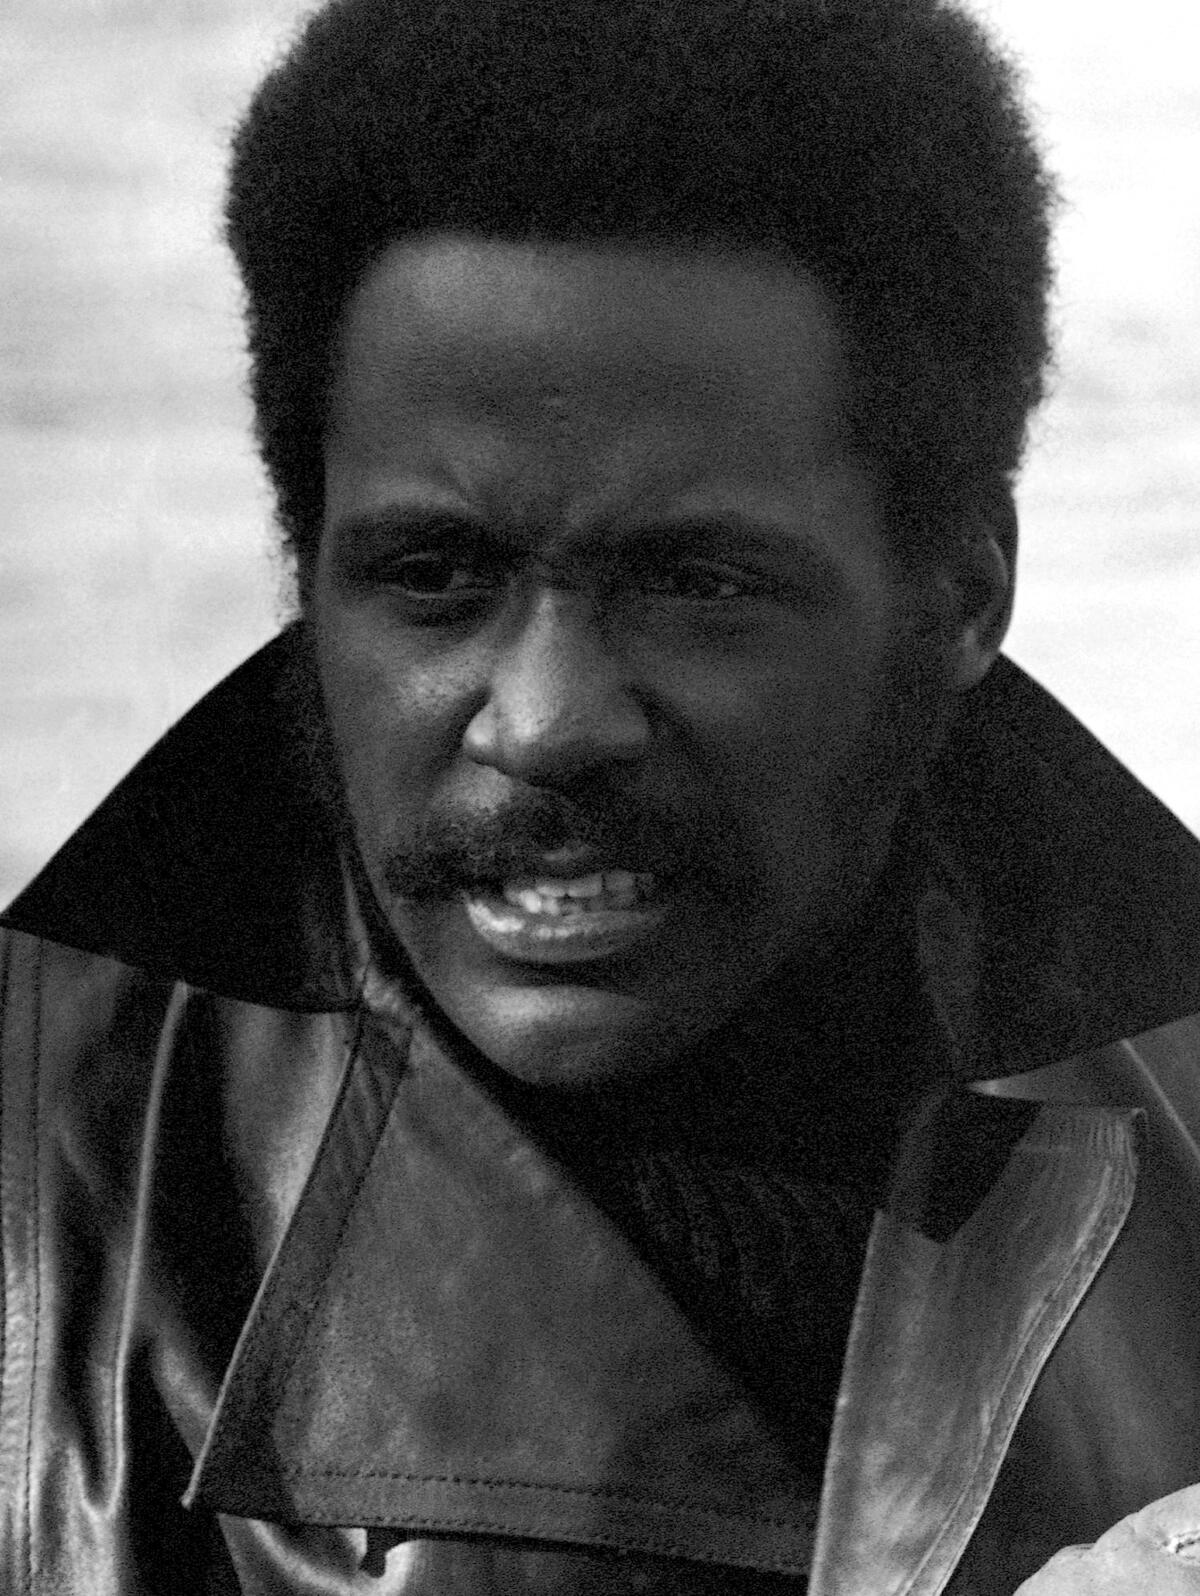 Closeup of a man with a mustache and wearing a black leather jacket.